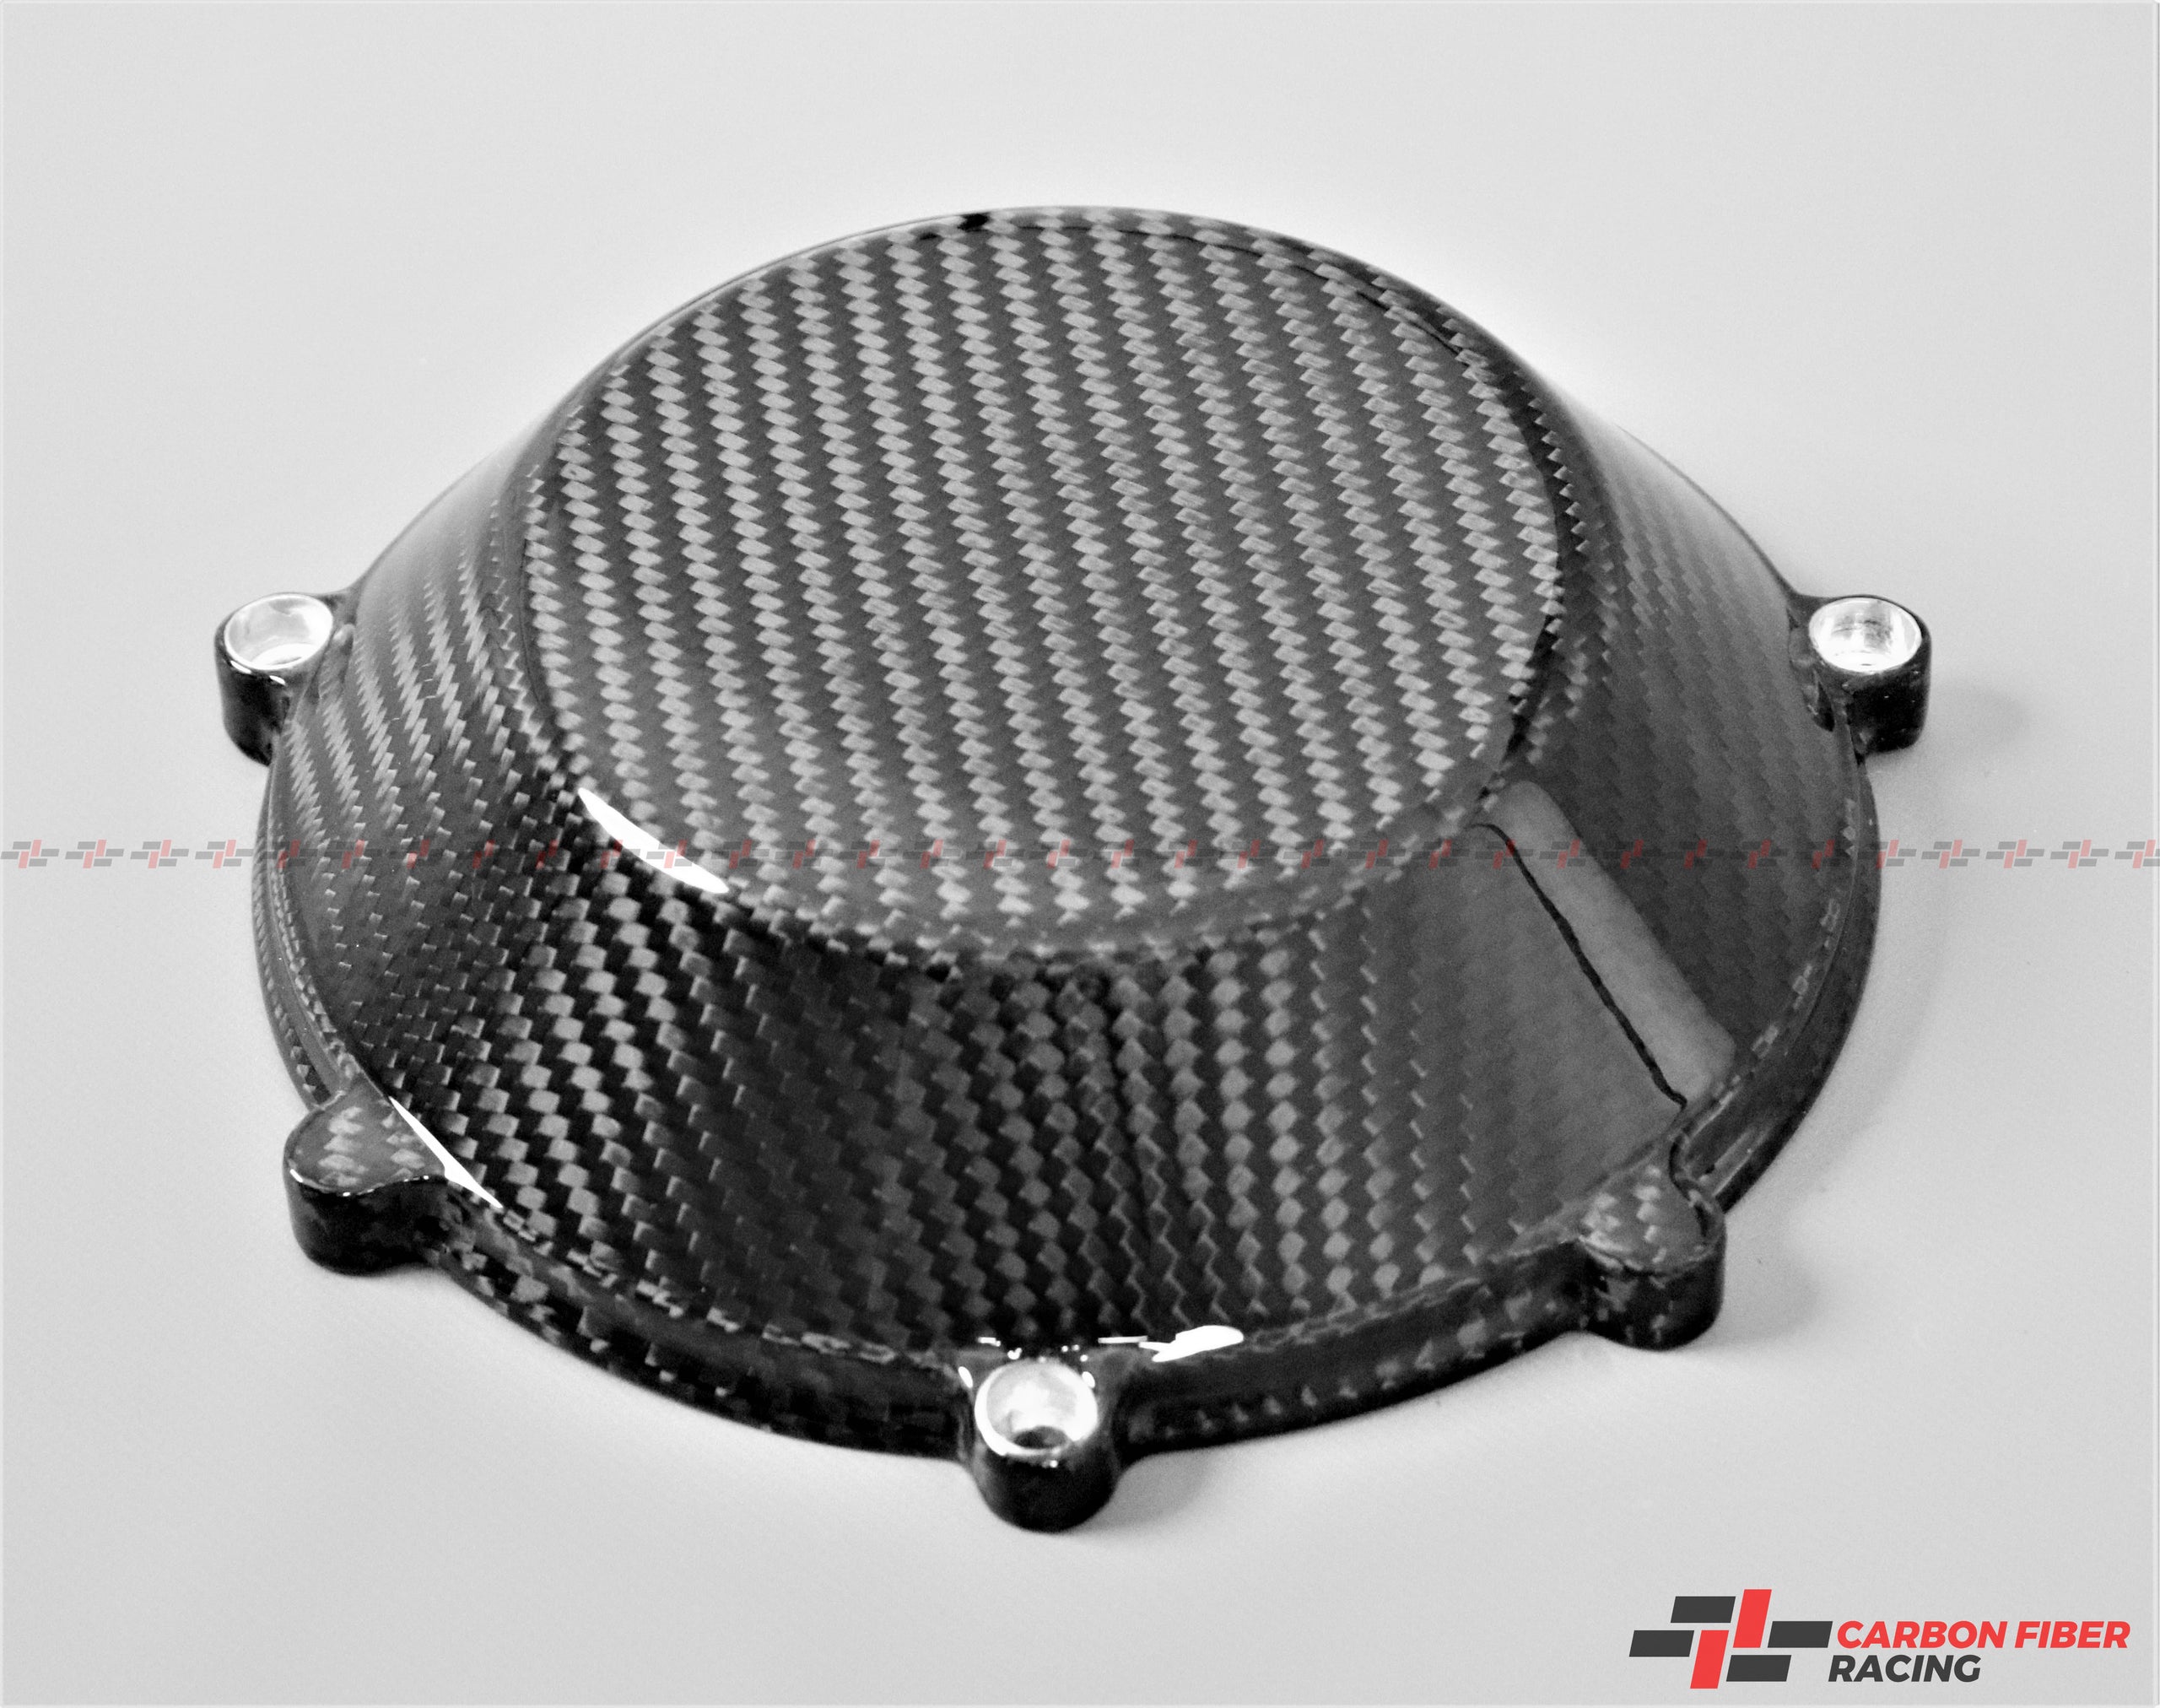 Ducati (Air Cooled 4V Engine) Dry Clutch Cover with Aluminum Inserts